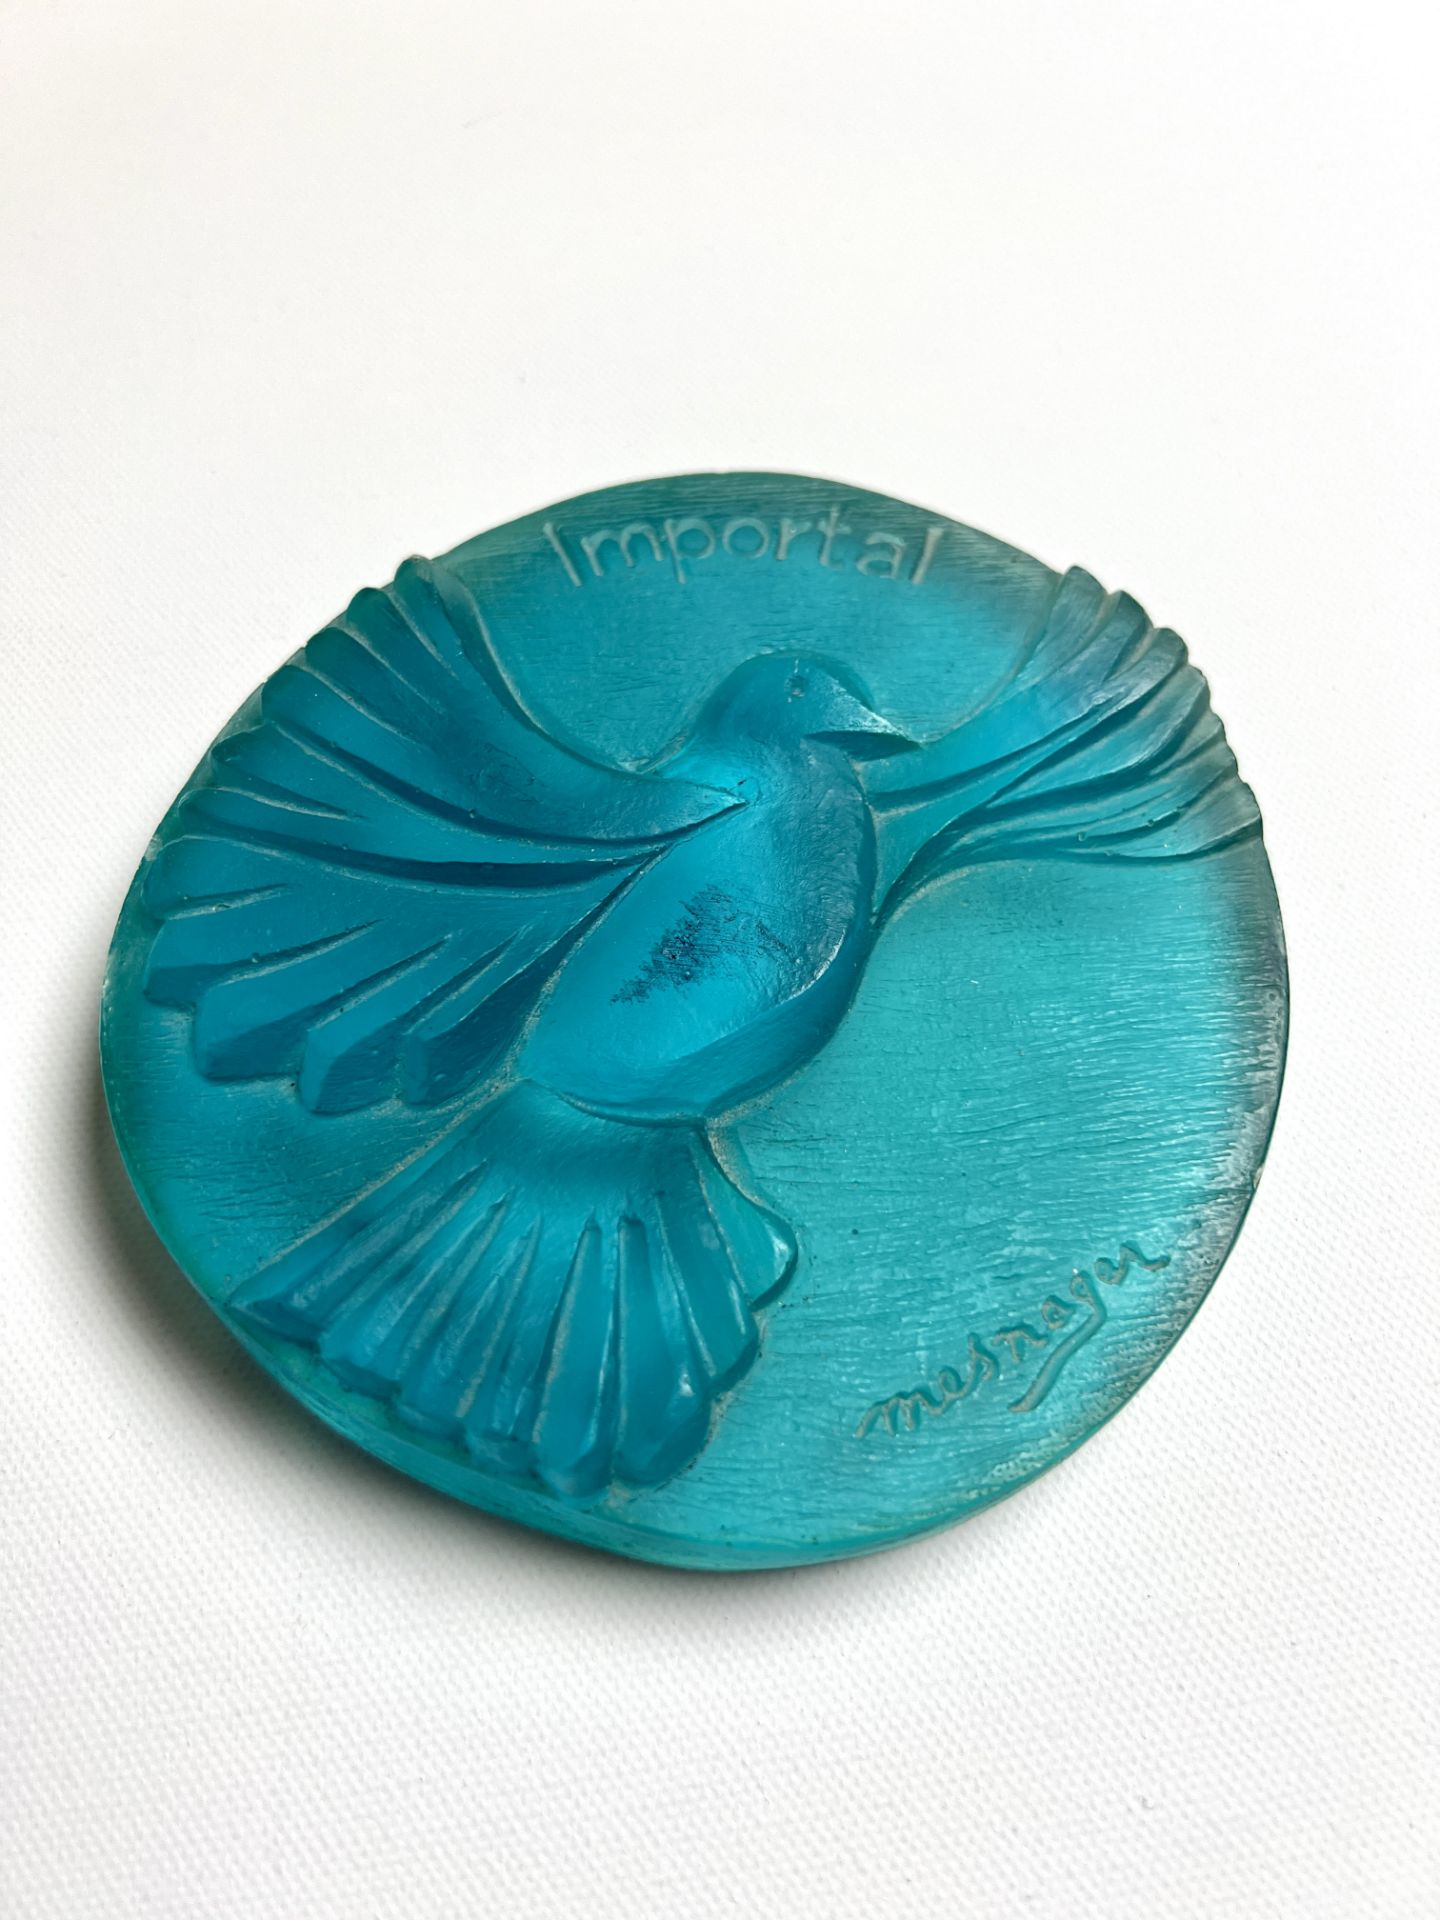 Jerome Mesnager. "Dove". Resin bas-relief. Signed "Mesnager". - Image 4 of 5